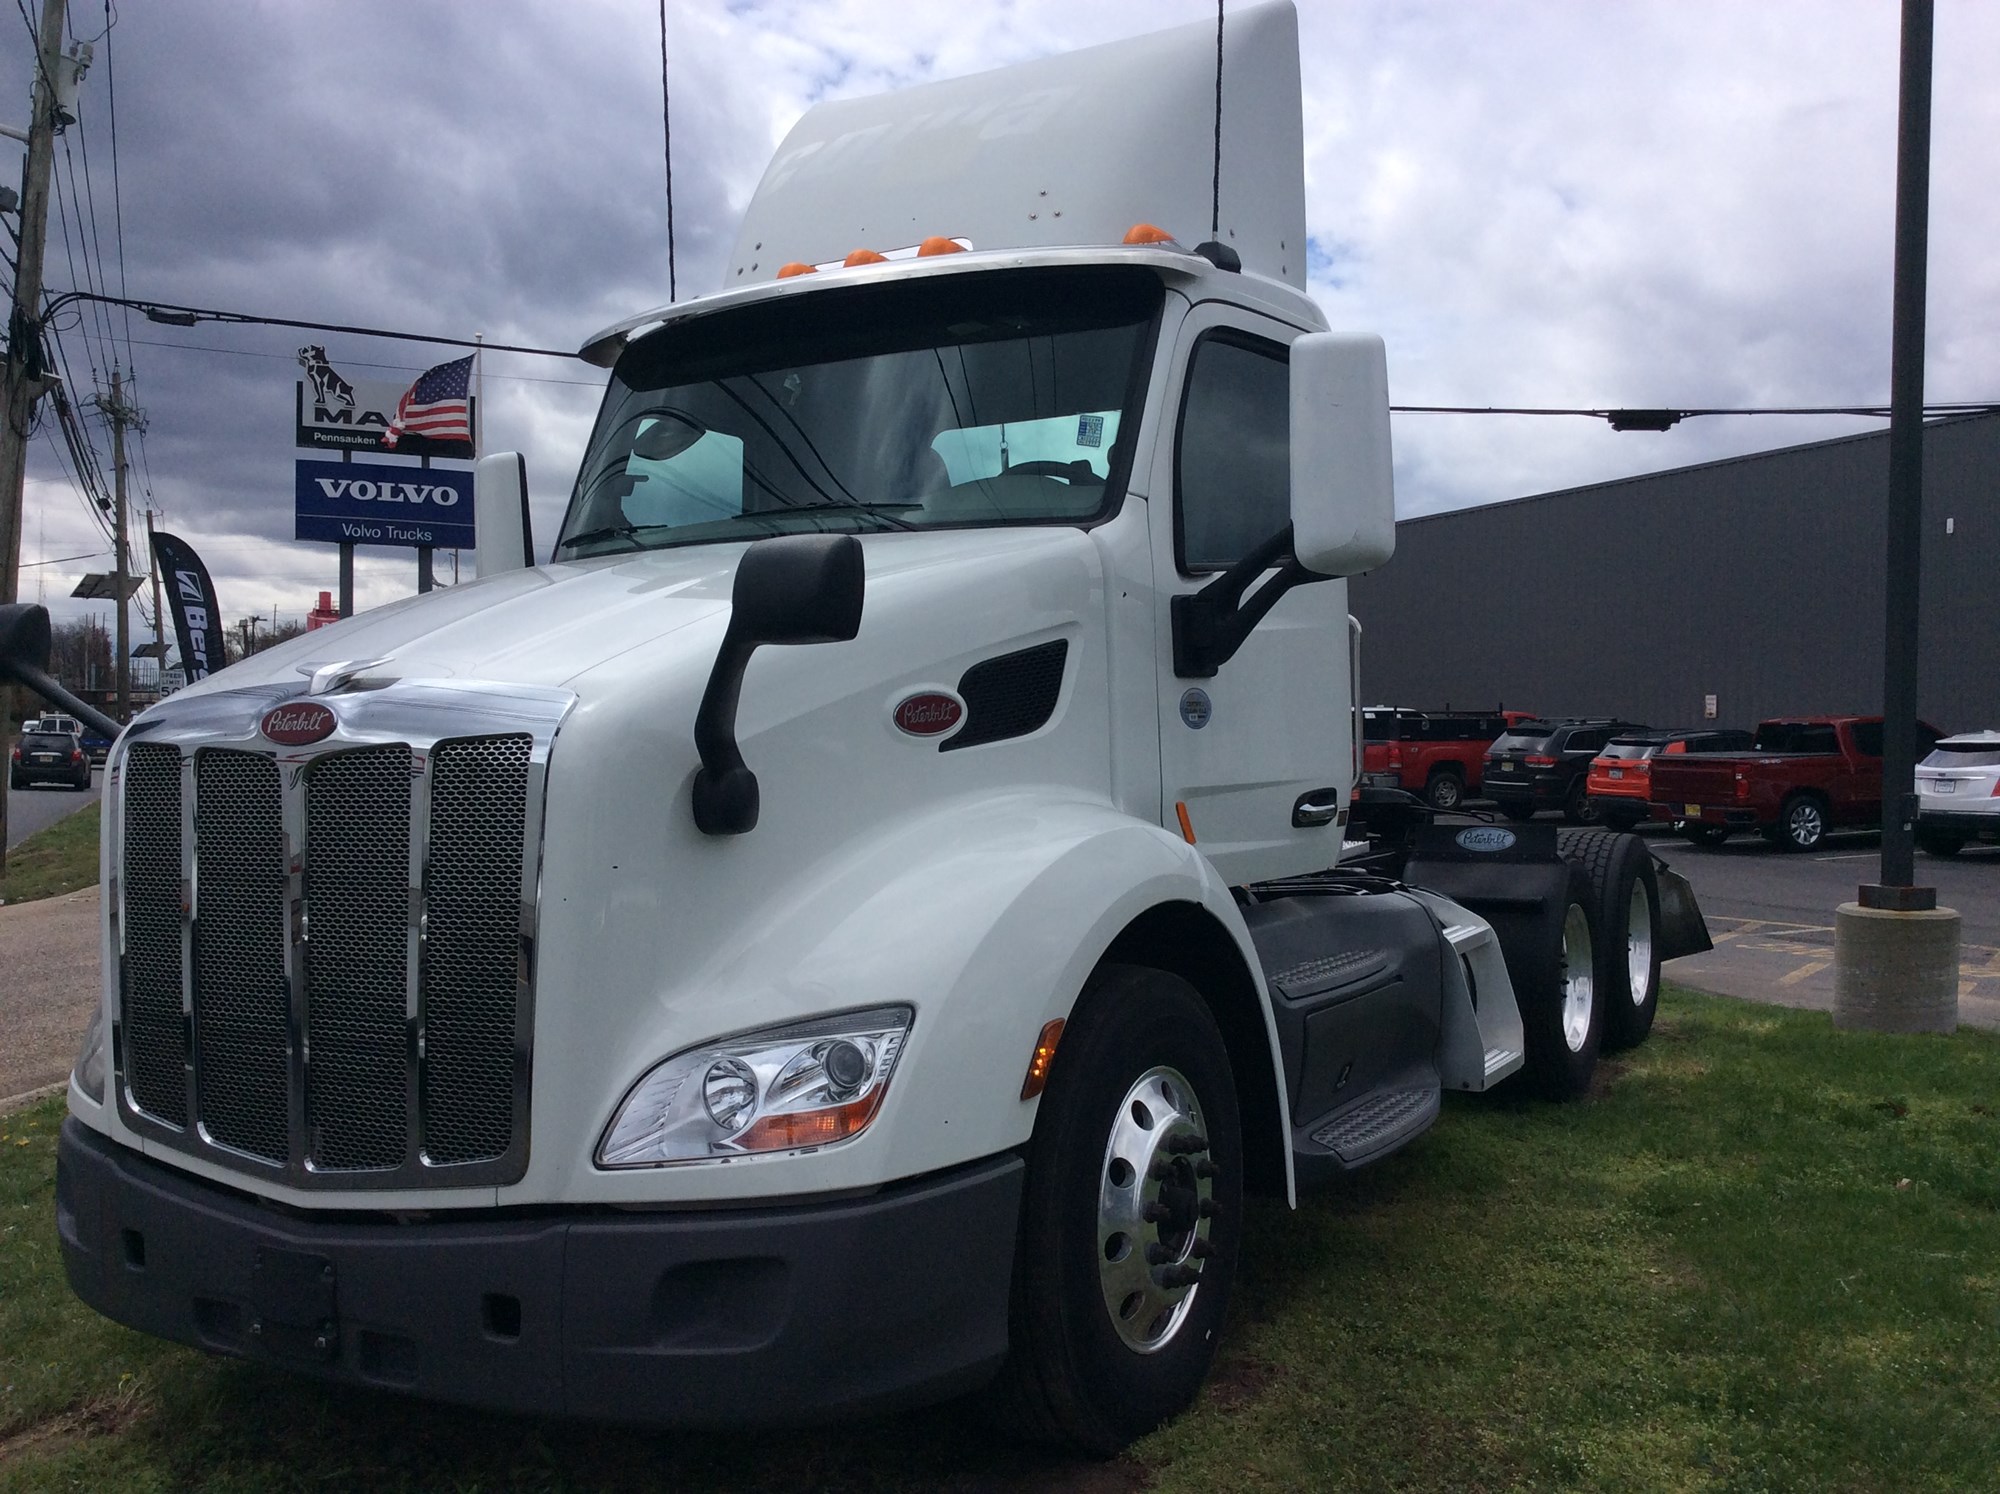 Used Truck Inventory - 1000907 01 - 17